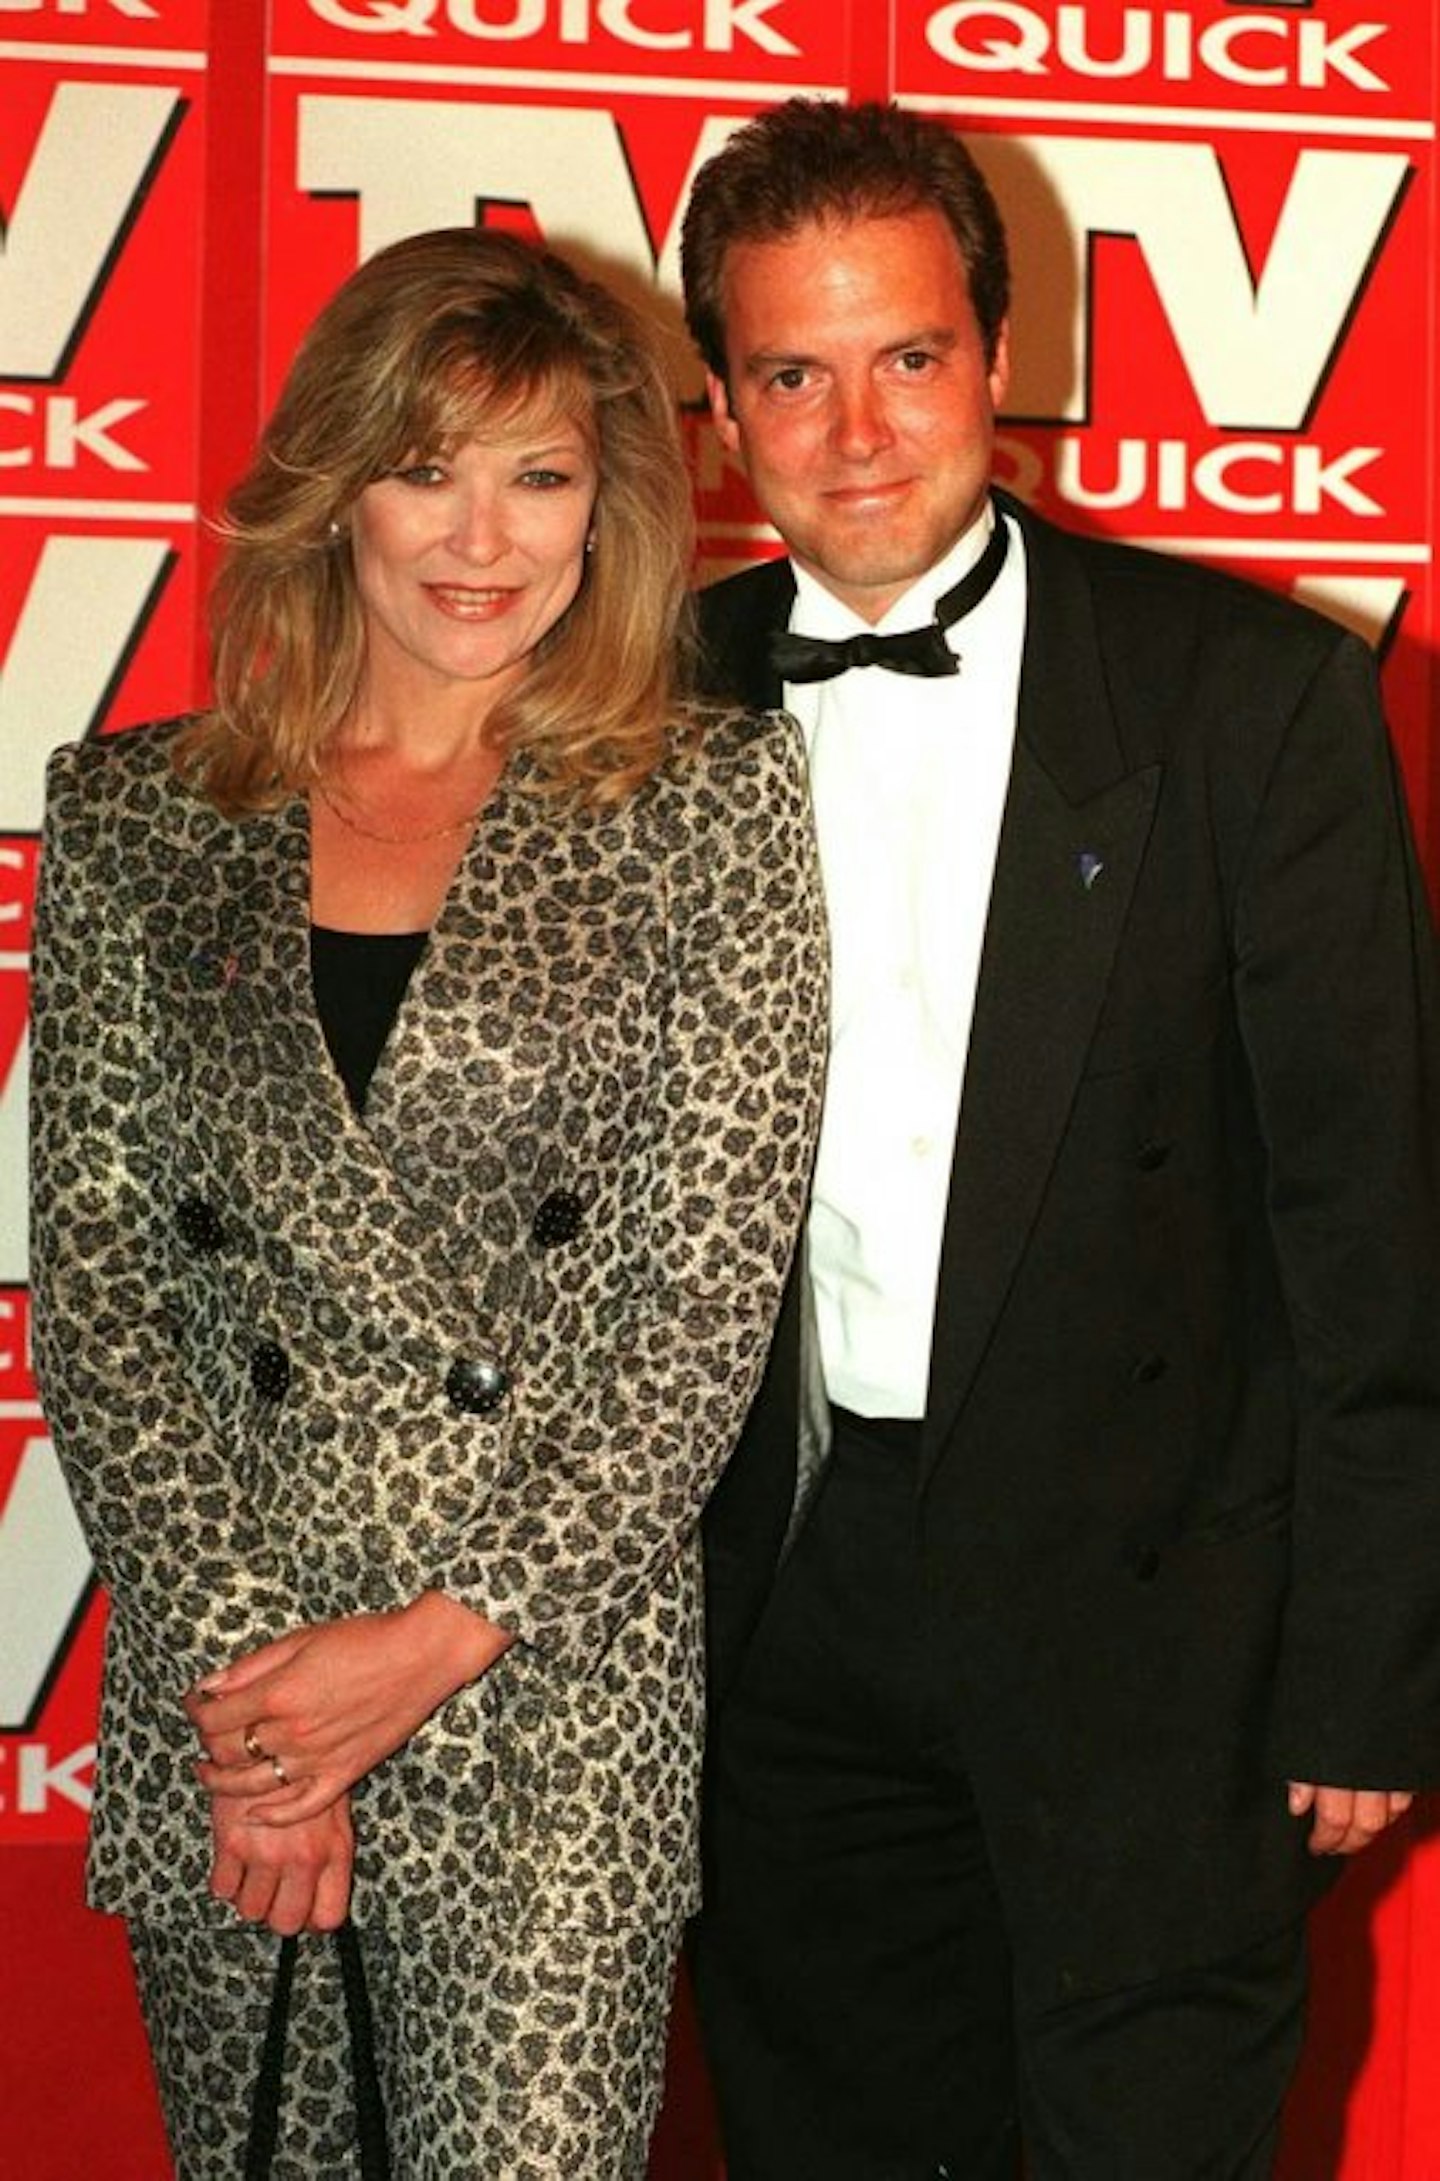 Peter Amory and Claire King